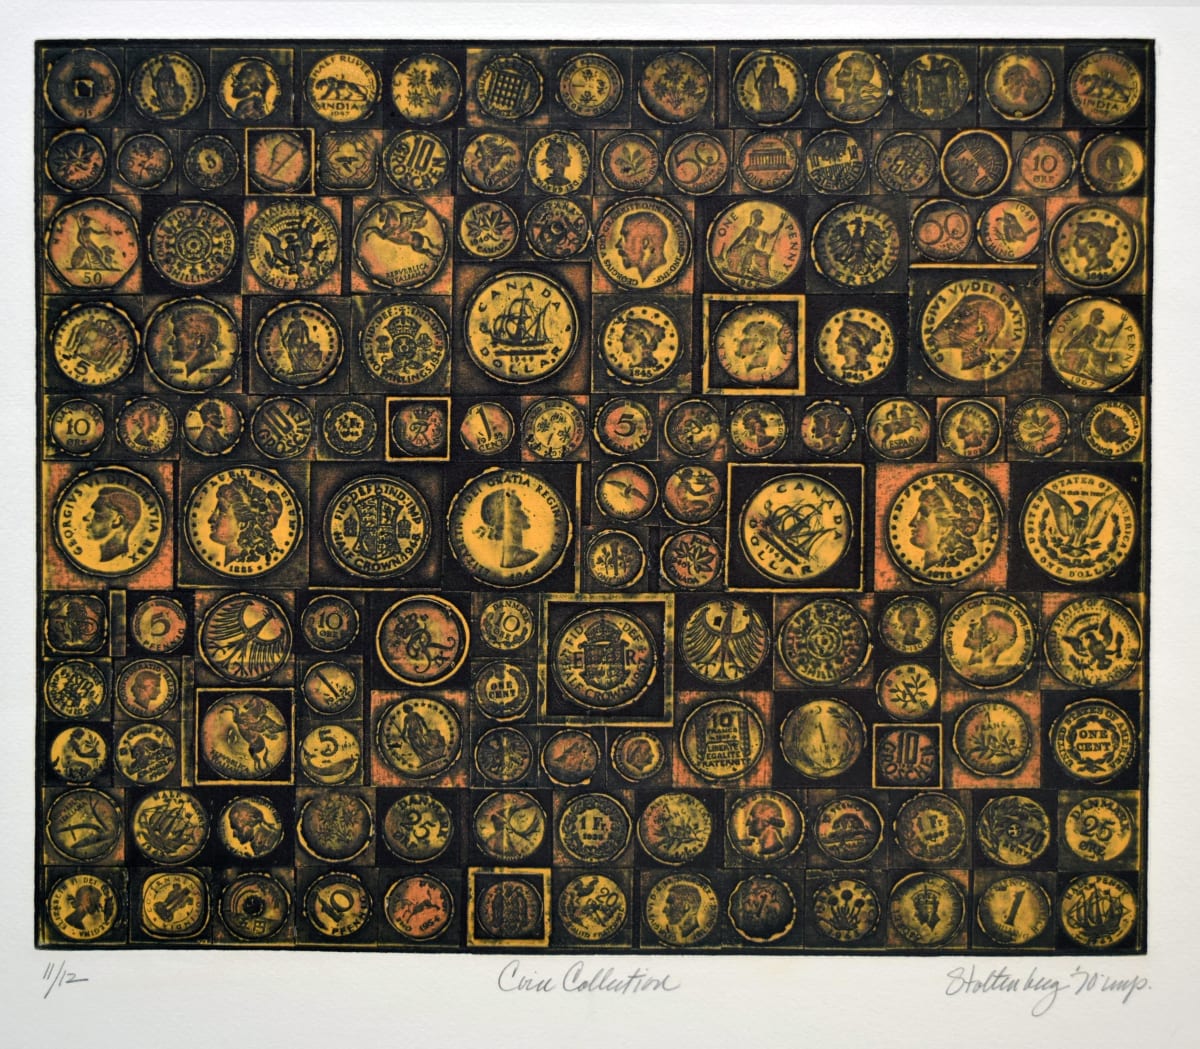 Coin Collection (large version) by Donald Stoltenberg  Image: Title